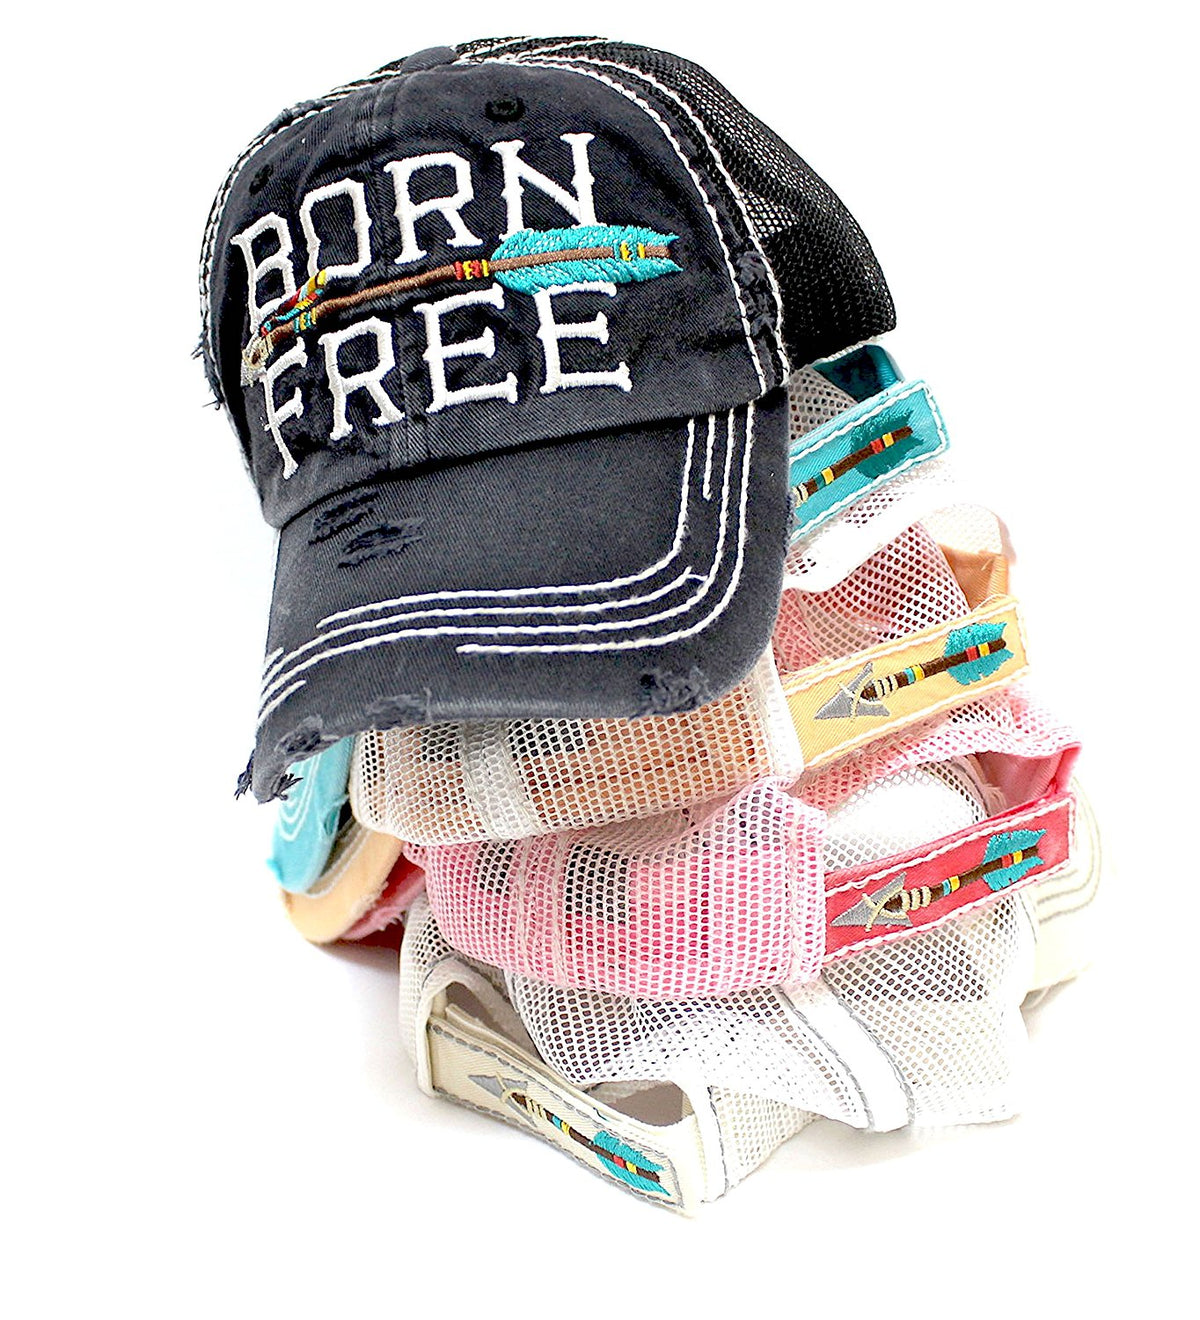 NEW!! OCEAN SUNSET COLLECTION--Turquoise Meshback "BORN FREE" Vintage Trucker Hat - Caps 'N Vintage 